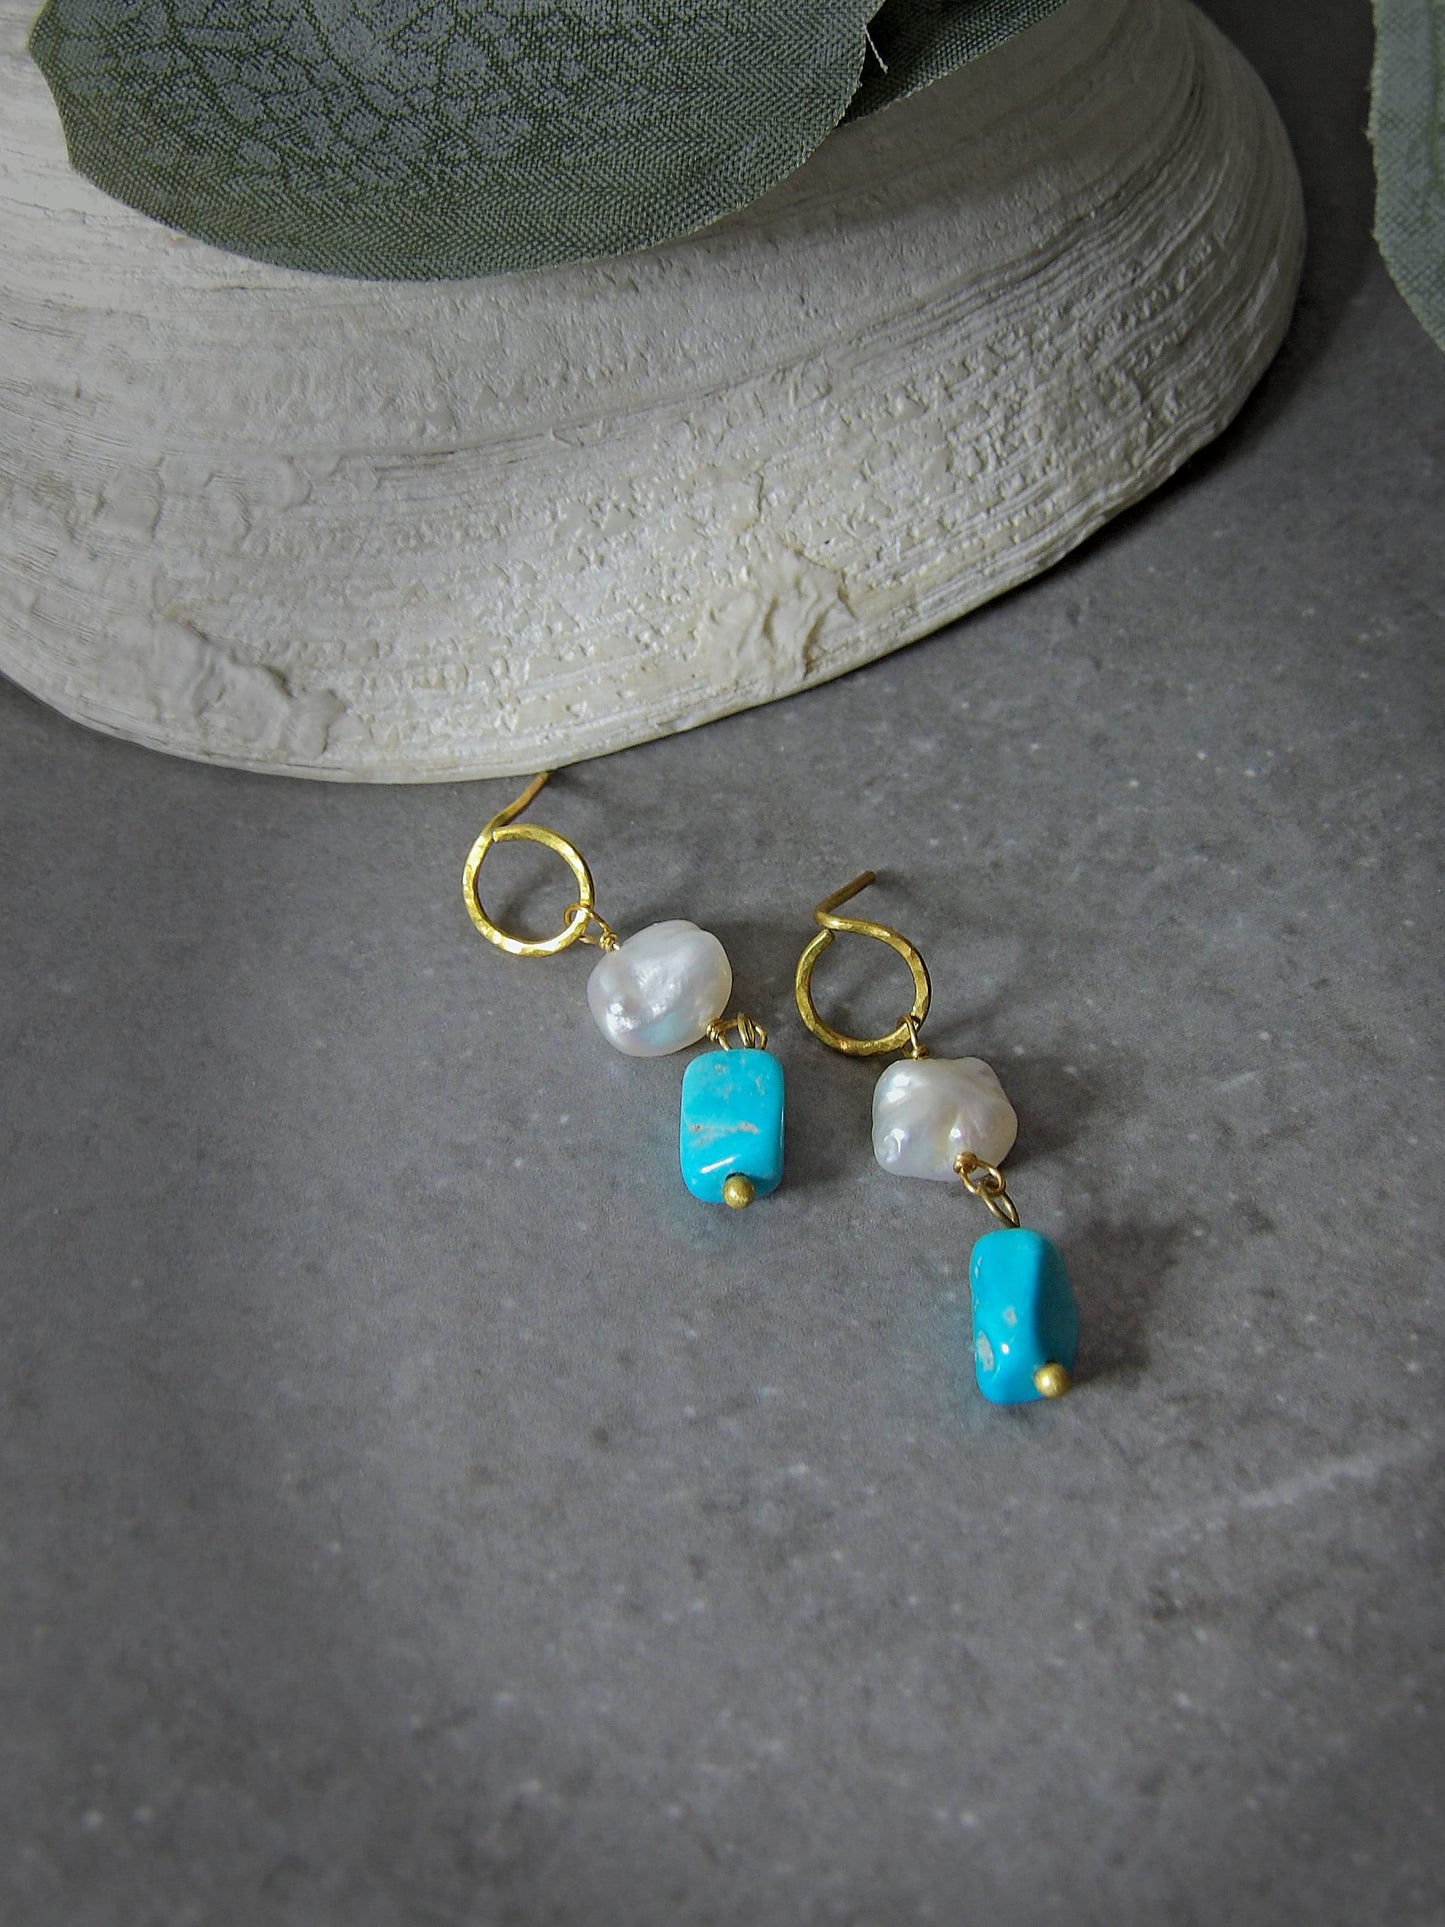 Irregular pearl earrings. Baroque pearl earrings. Arizona Turquoise Earrings. Turquoise Stud Earrings. Eco friendly authentic turquoise jewelry. Bohemian jewelry. Boho earrings. Open circle stud earrings.